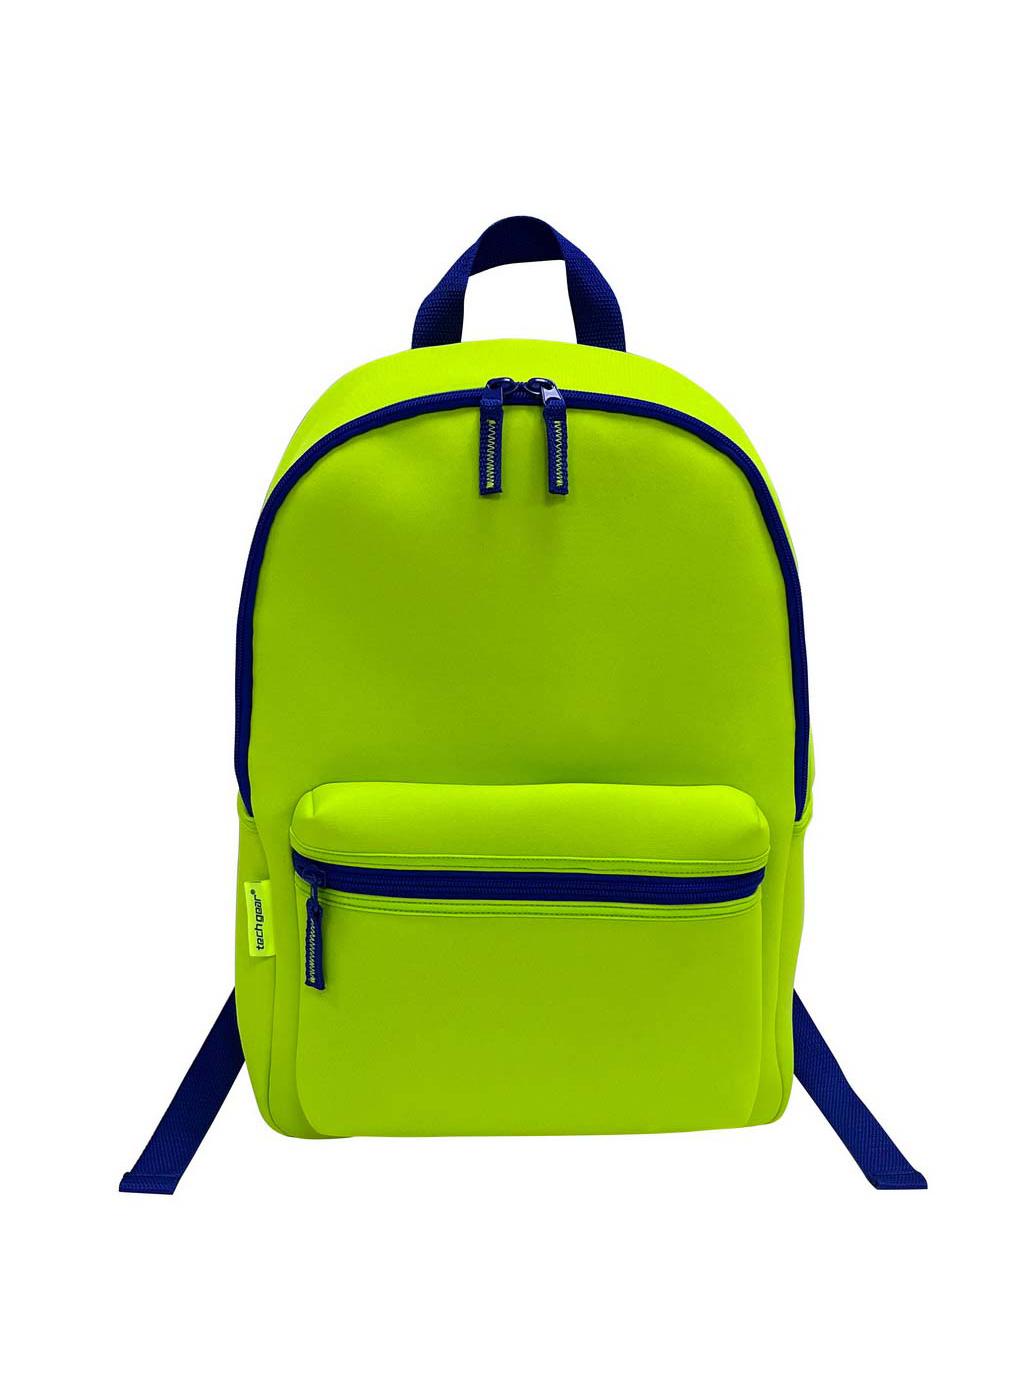 Tech Gear Wetsuit Backpack - Green & Blue; image 1 of 3